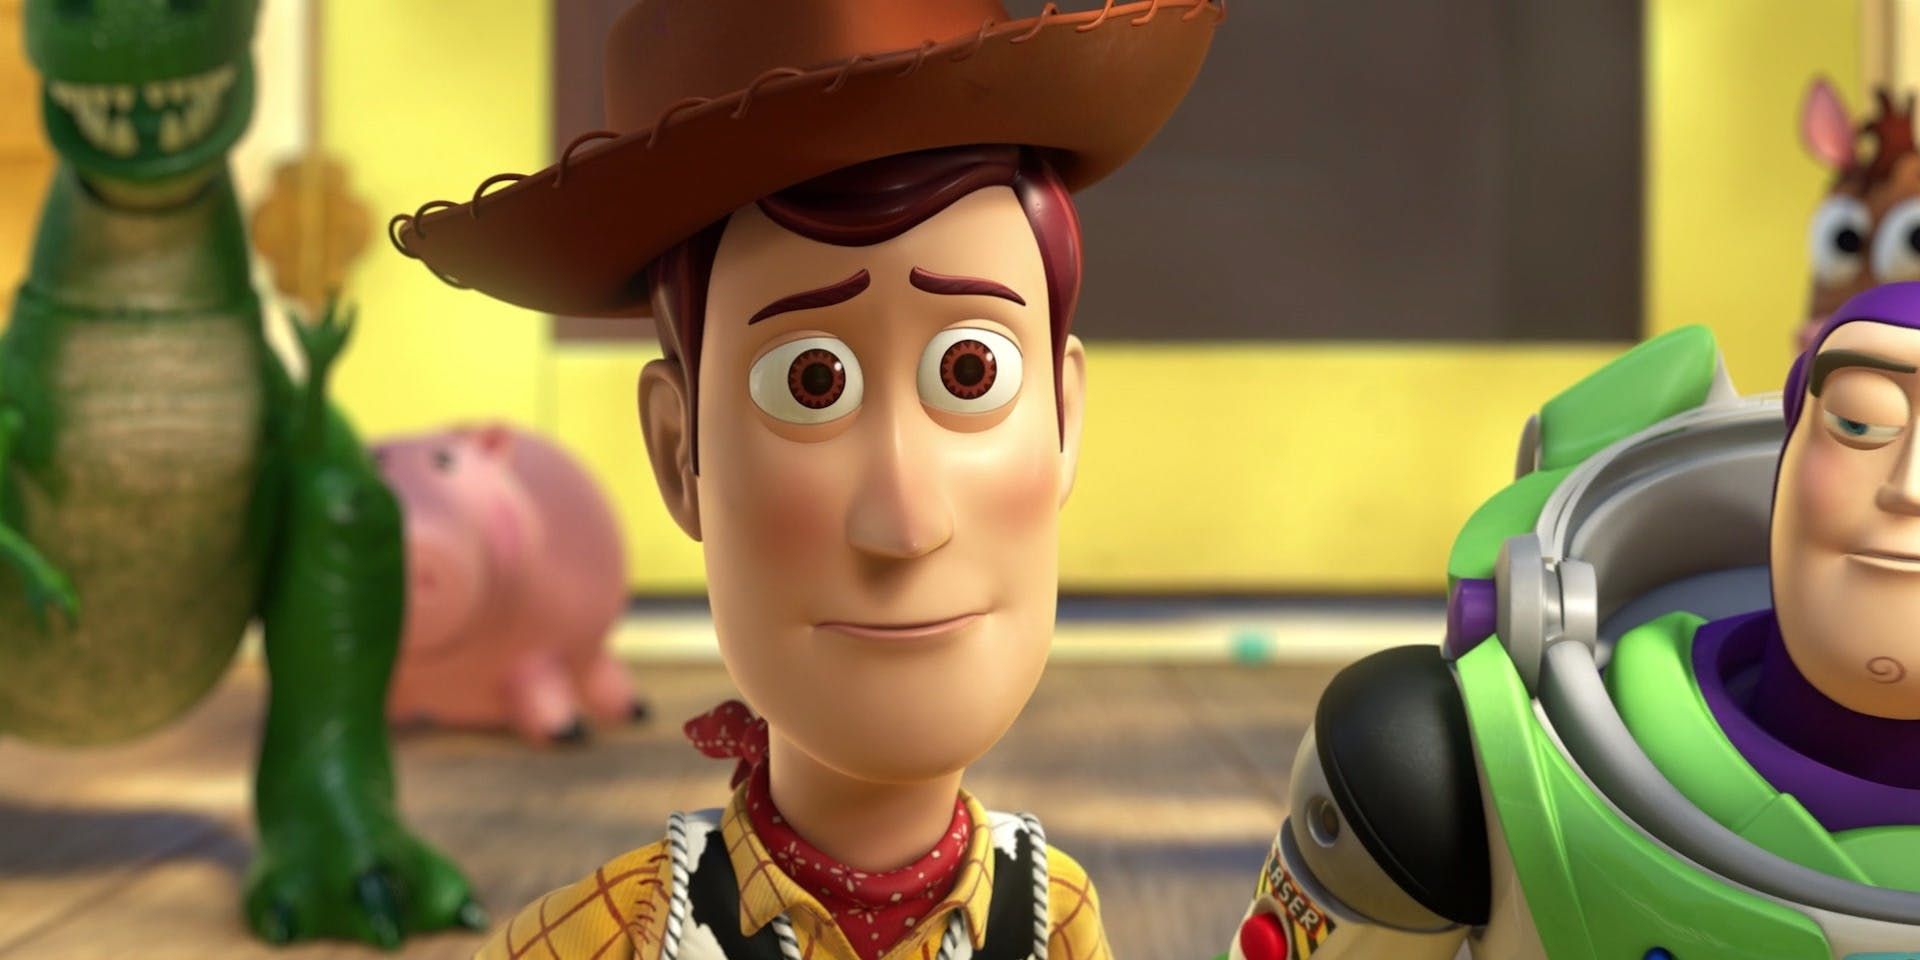 Woody says goodbye in Toy Story 3